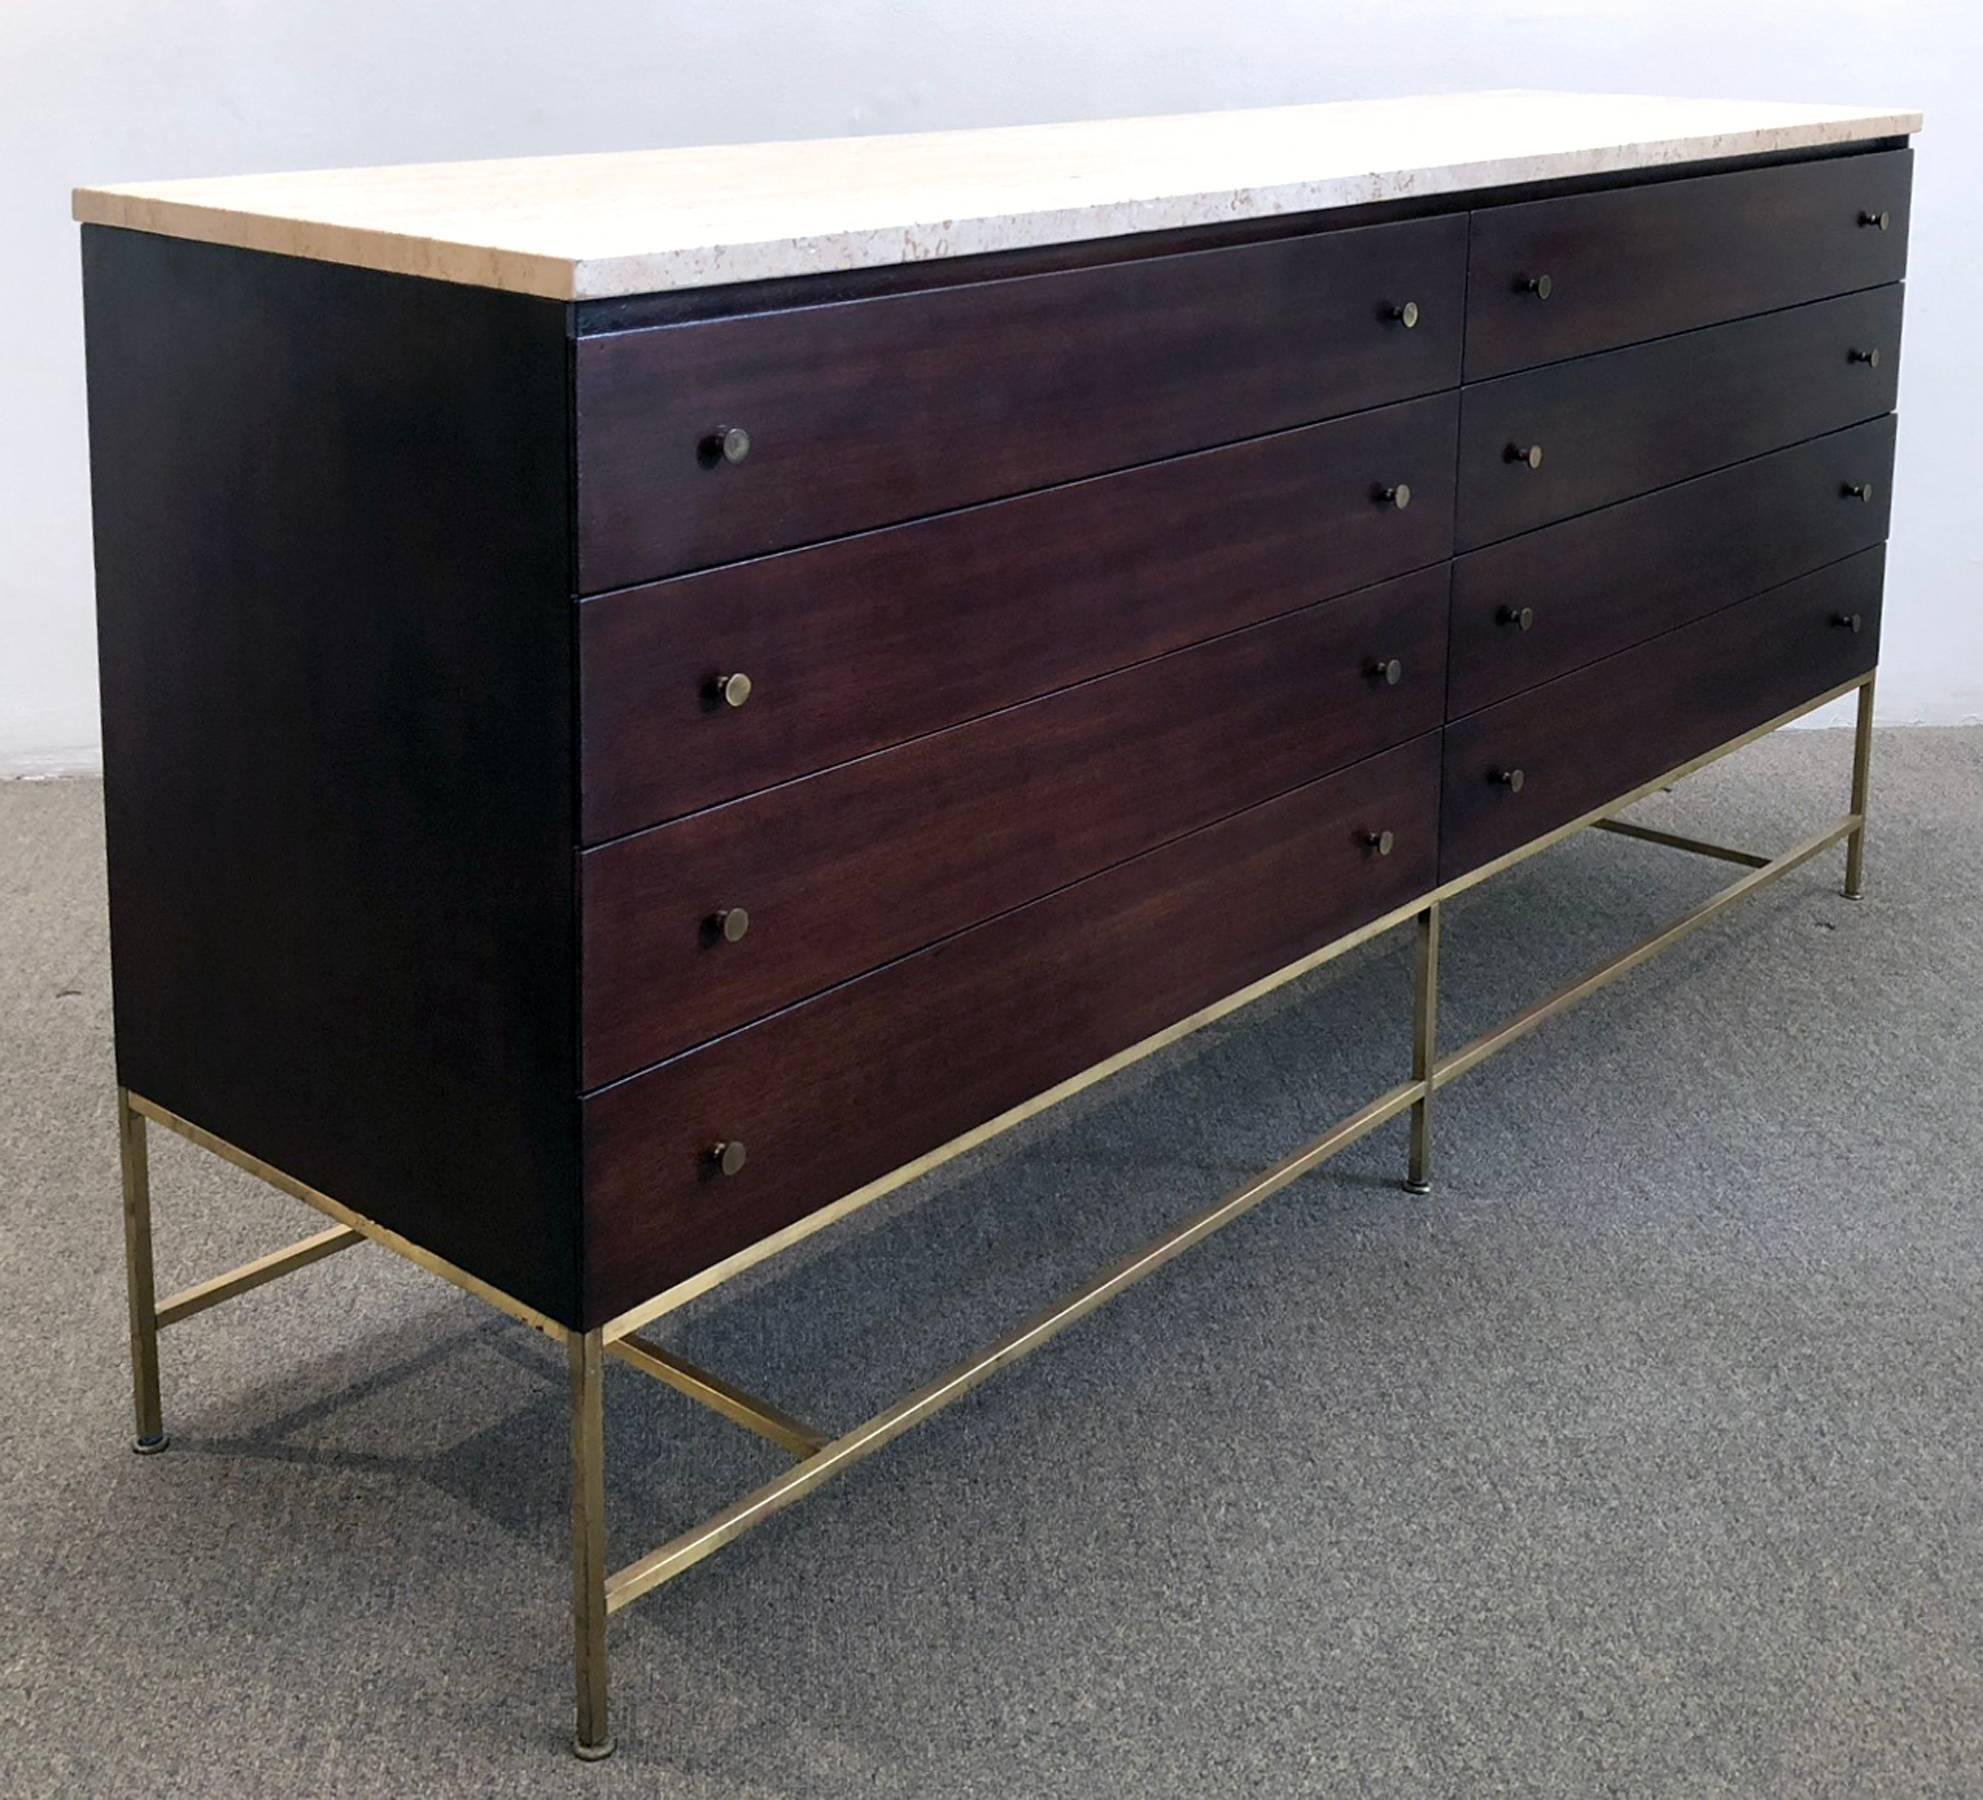 Eight-drawer dresser or sideboard from the Irwin collection designed by Paul McCobb for Calvin. Features a travertine top, brass pulls and base, with mahogany. Finished on all sides. Retains original label.